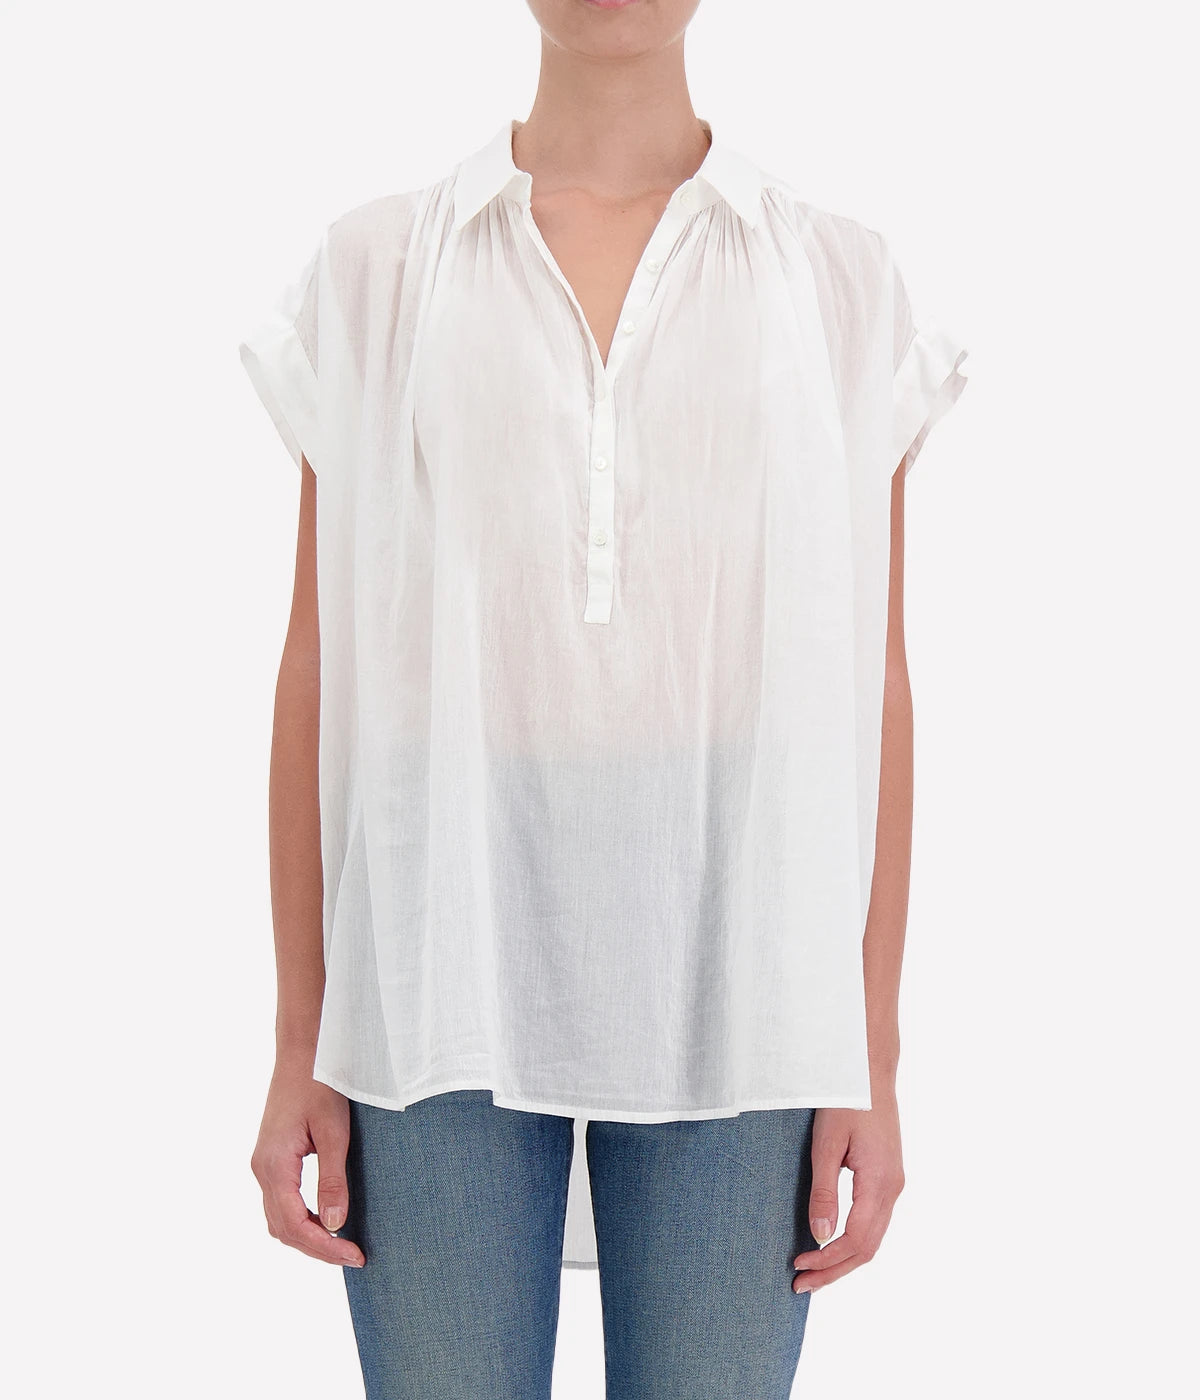 Normandy Blouse in Ivory